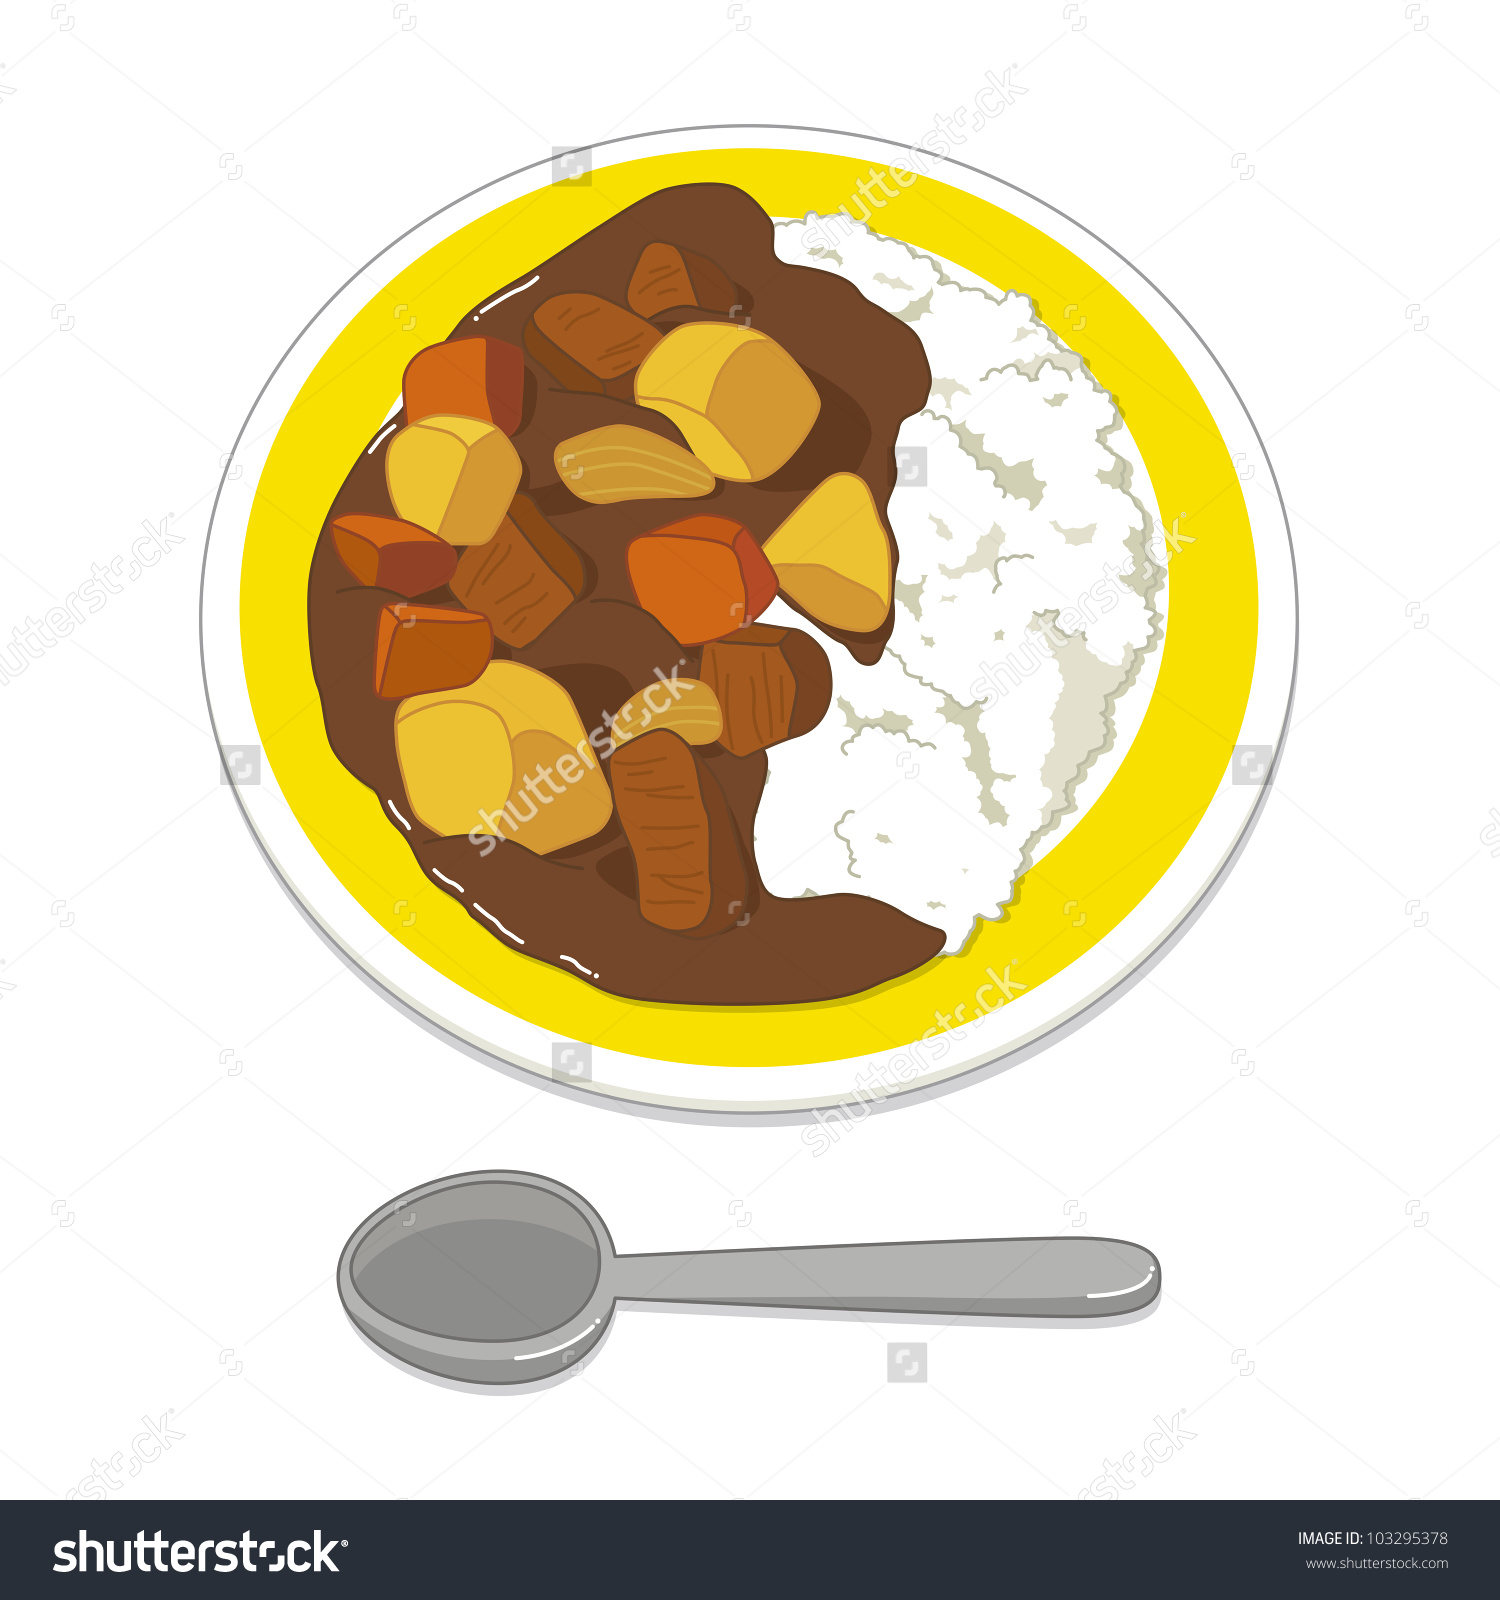 Chicken Curry Clipart.